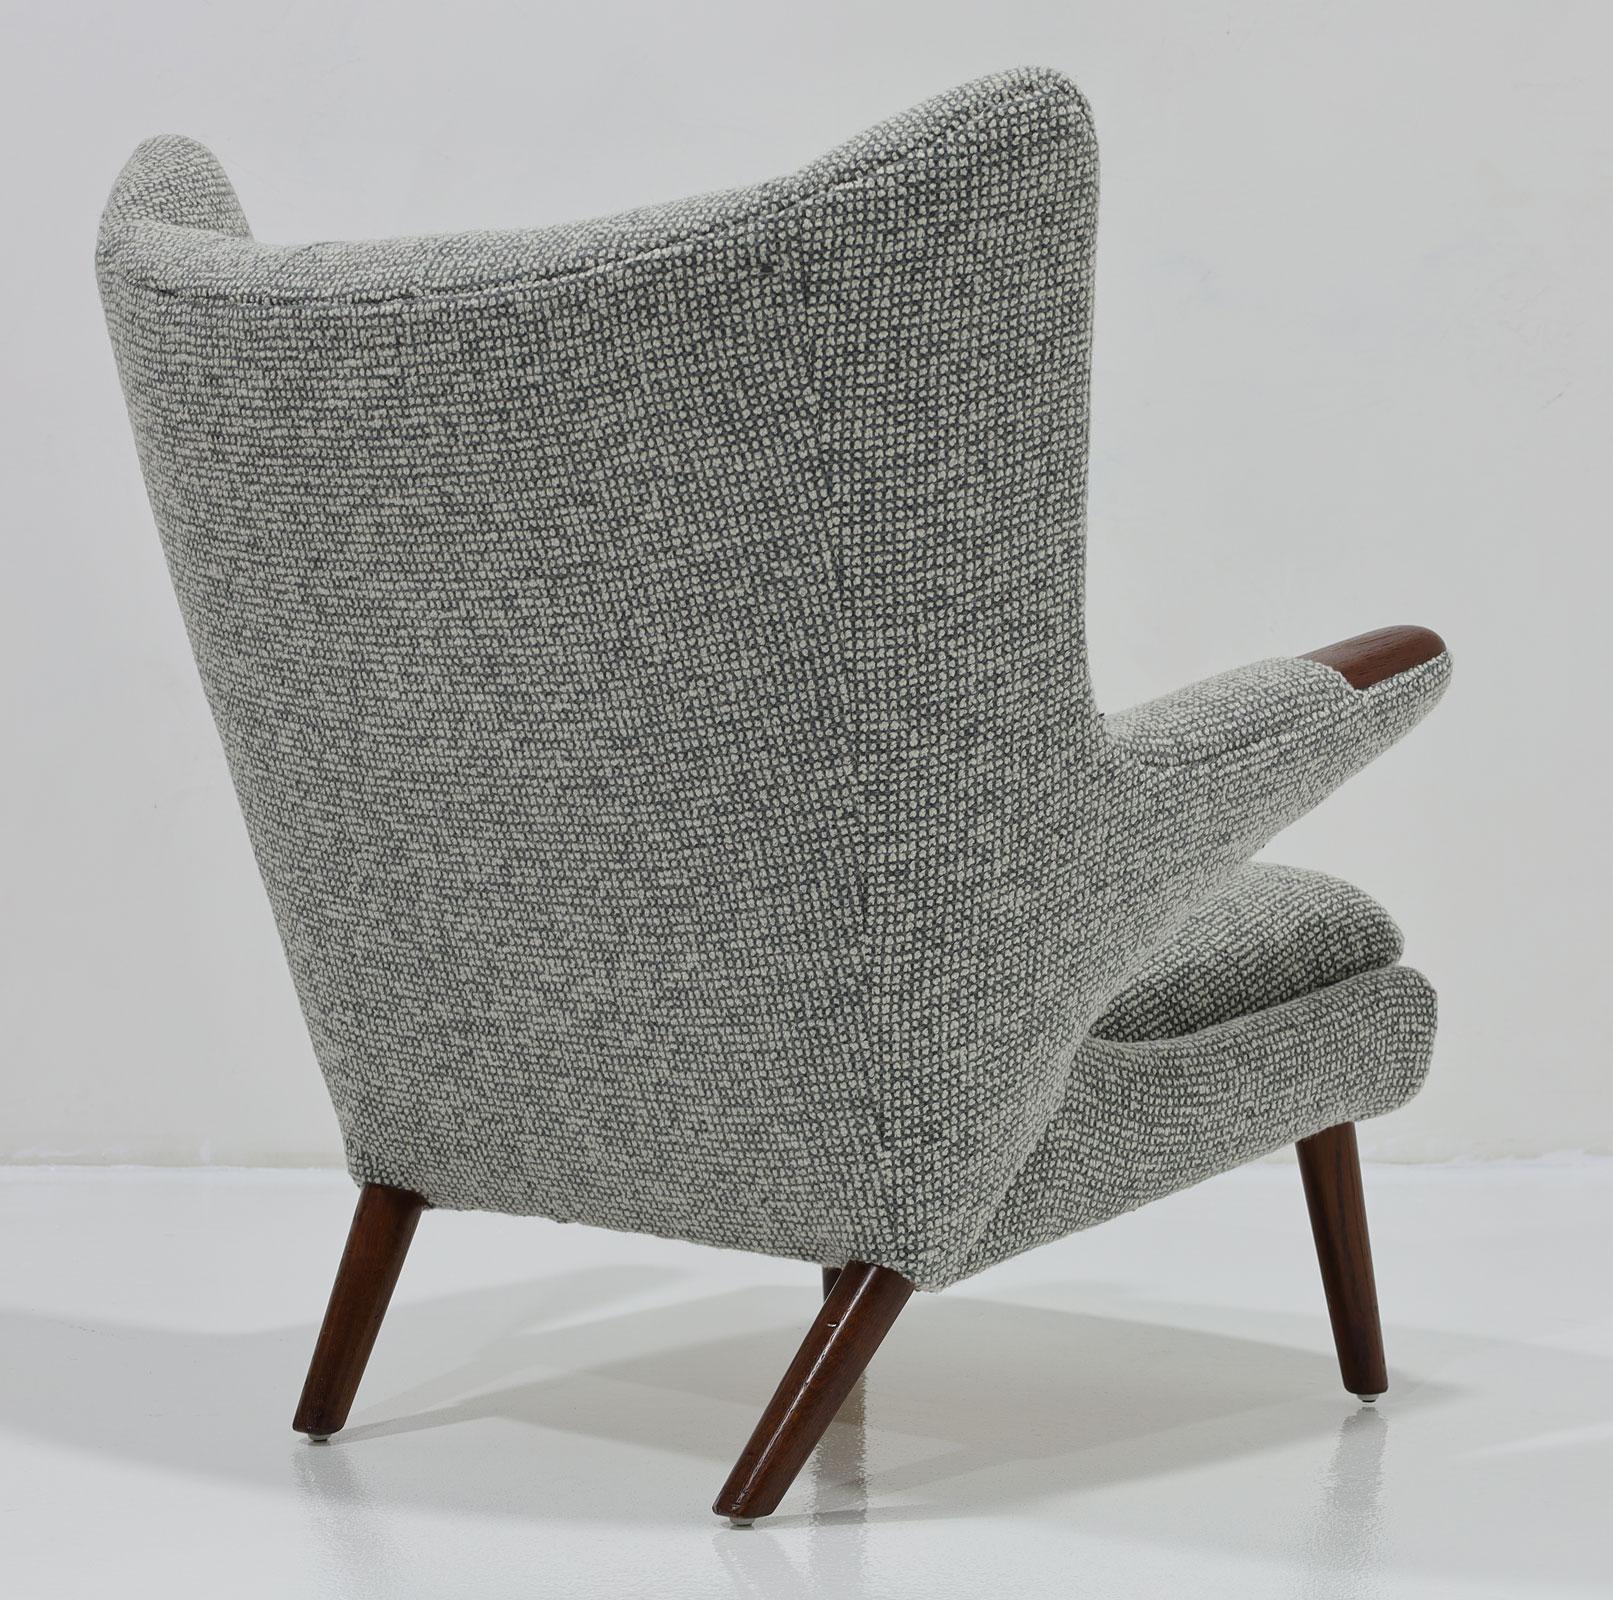 Hans J. Wegner AP19 Papa Bear Chair in Maharam Wool Boucle' In Good Condition For Sale In Dallas, TX